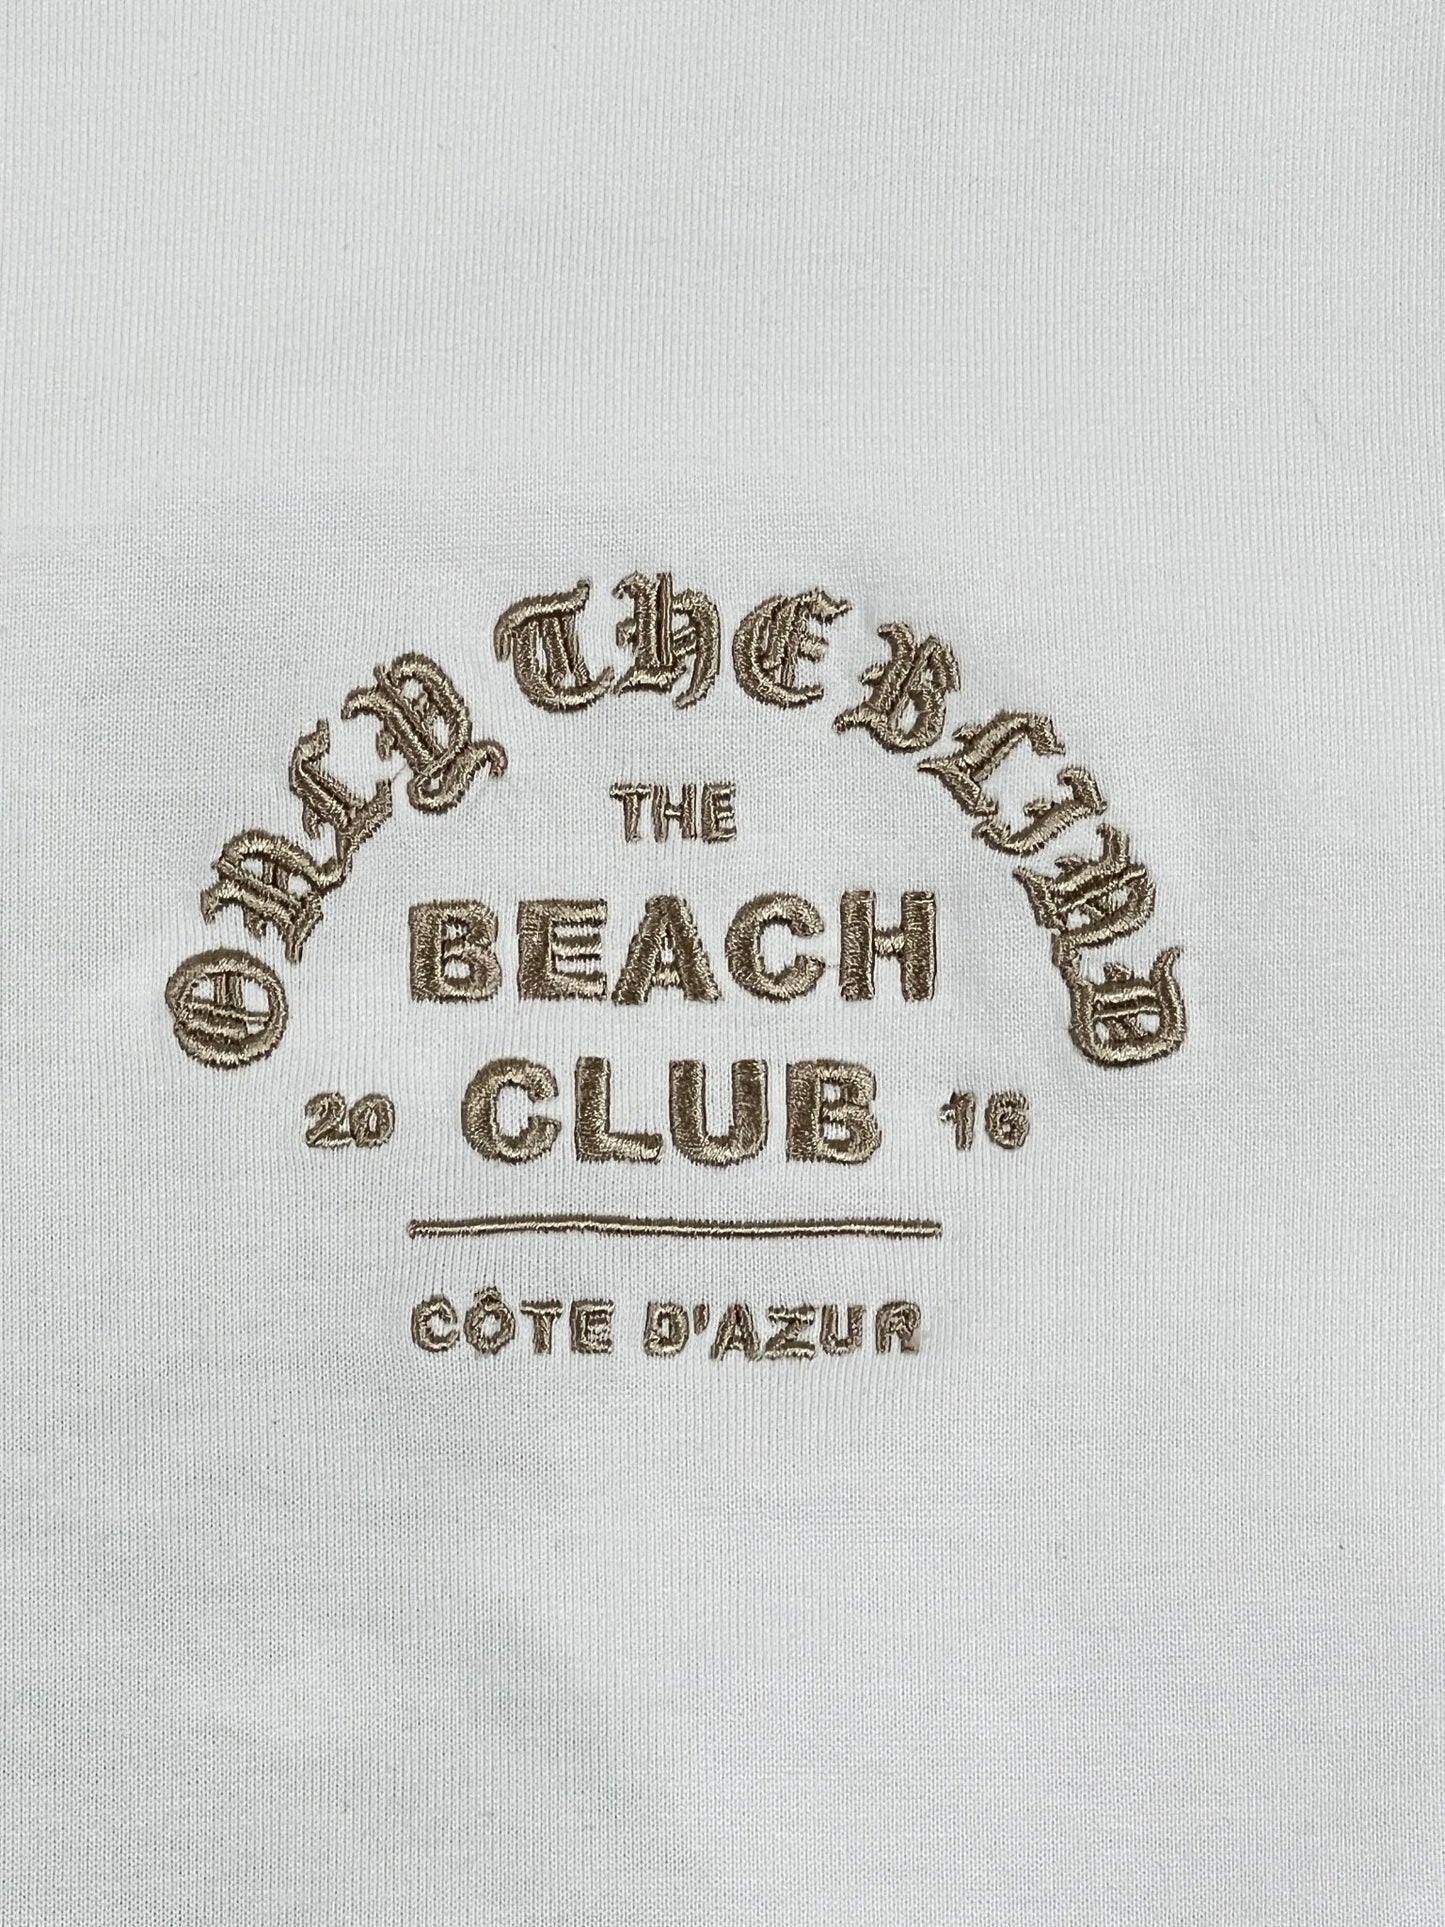 A white ONLY THE BLIND OTB-T1288 DESERT PALM T-SHIRT WHT that says the beach club.